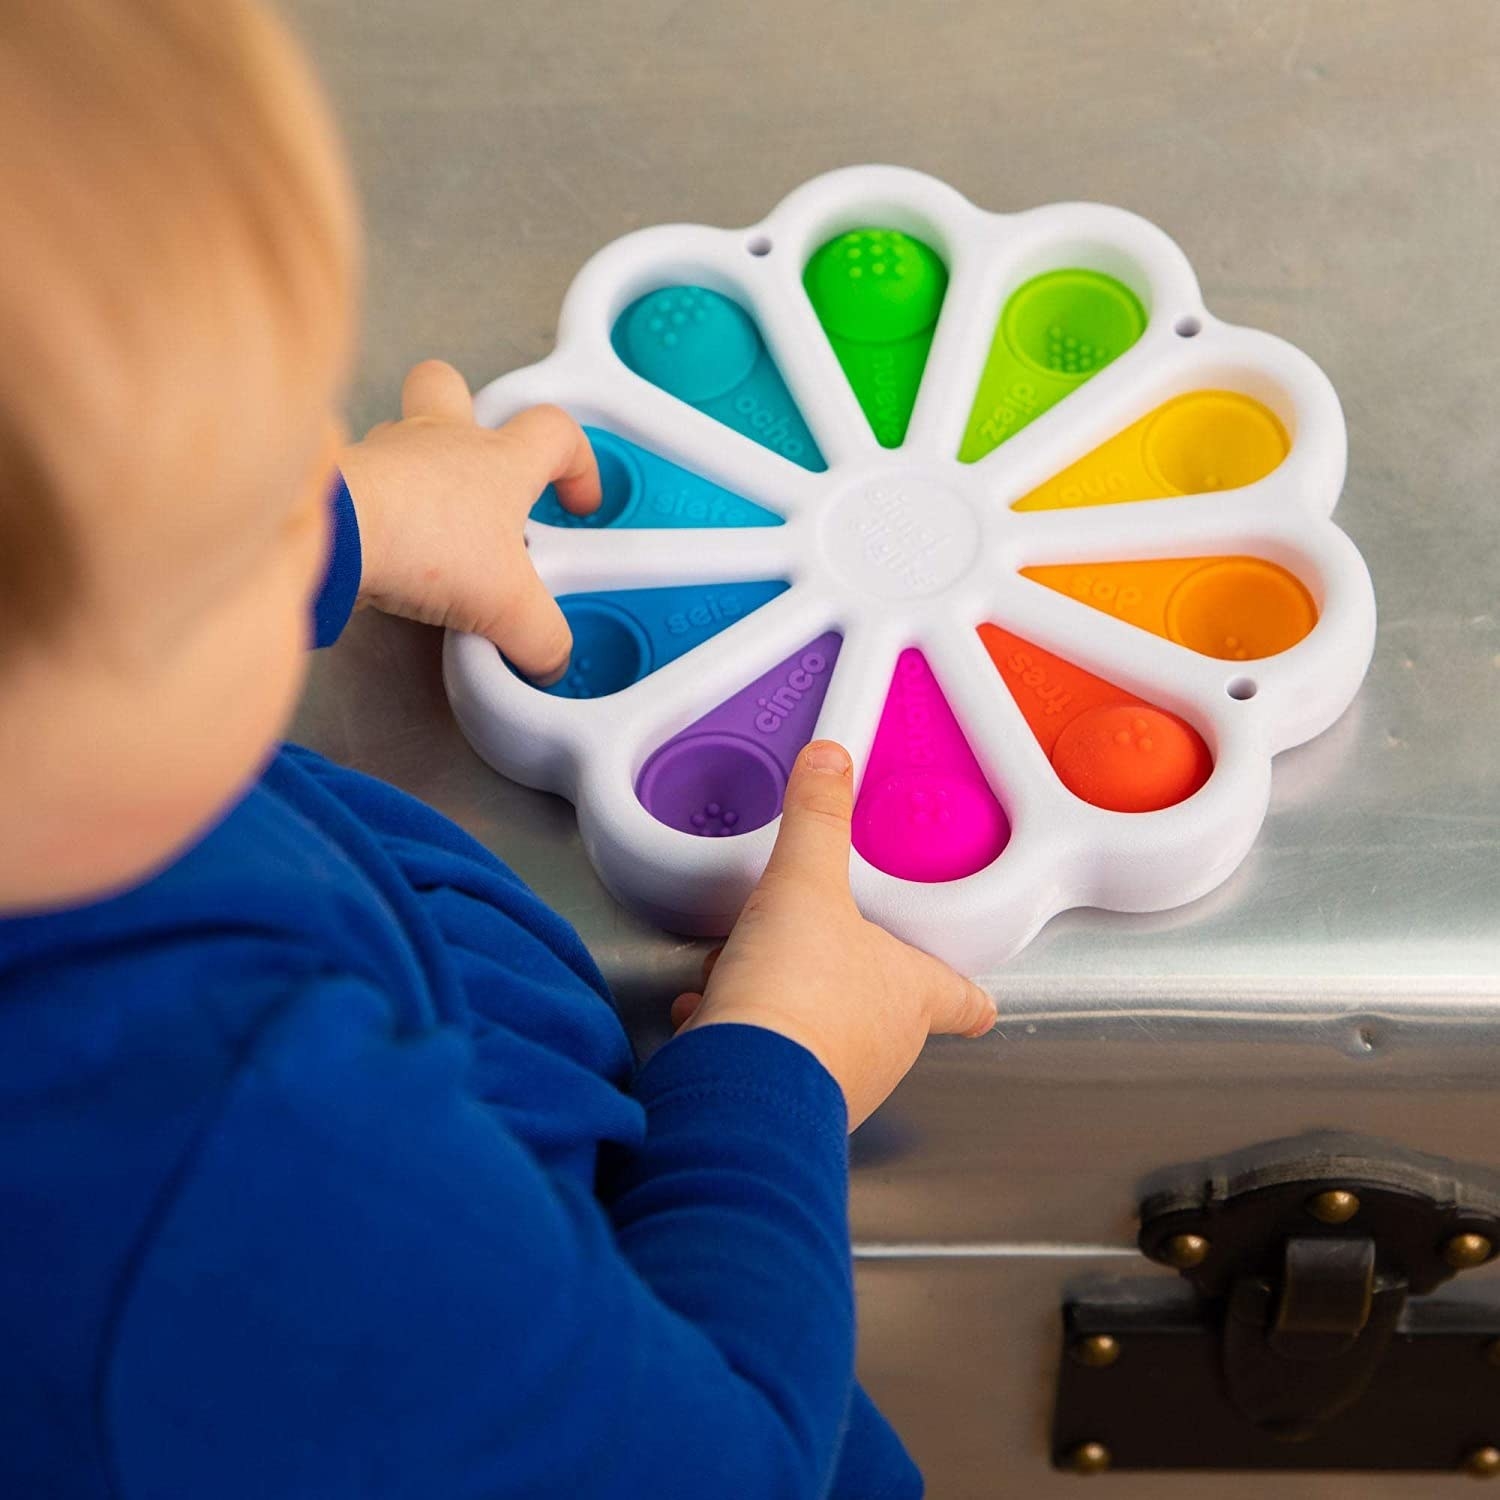 Child model playing with colorful wheel of Dimpl Digits